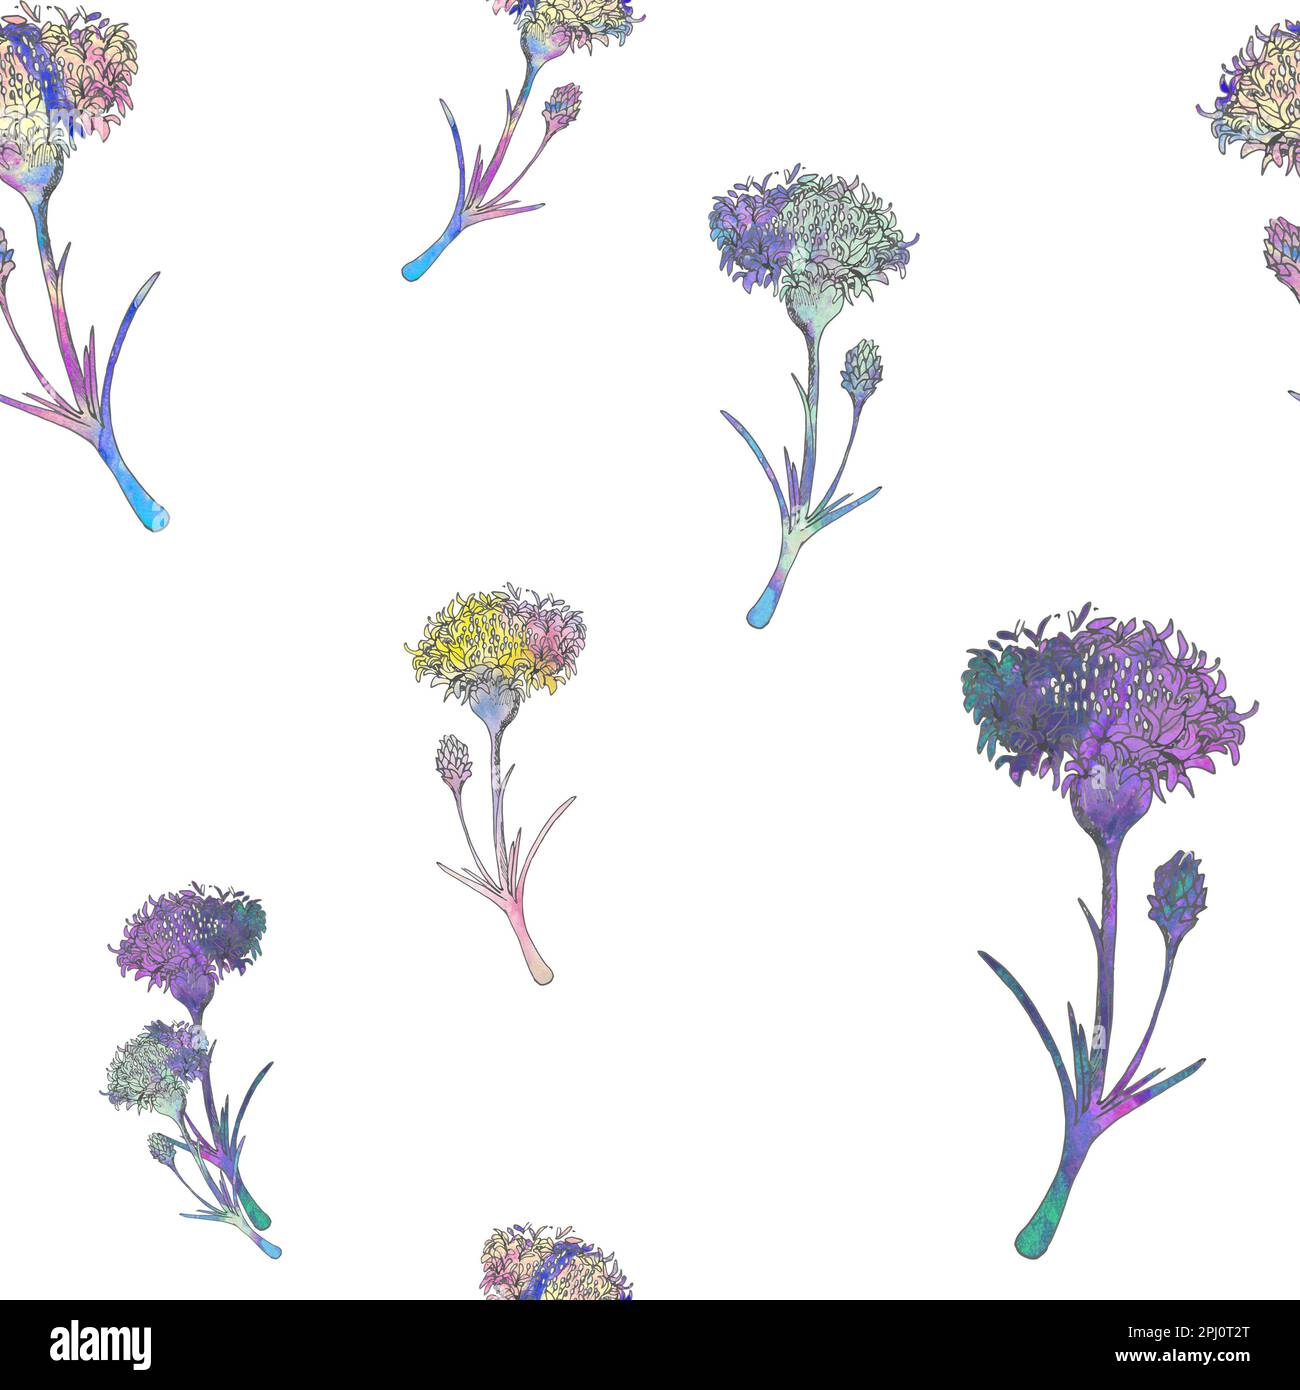 Flowers with watercolor texture. Watercolor field flowers. Flowers pattern on white background. Stock Photo